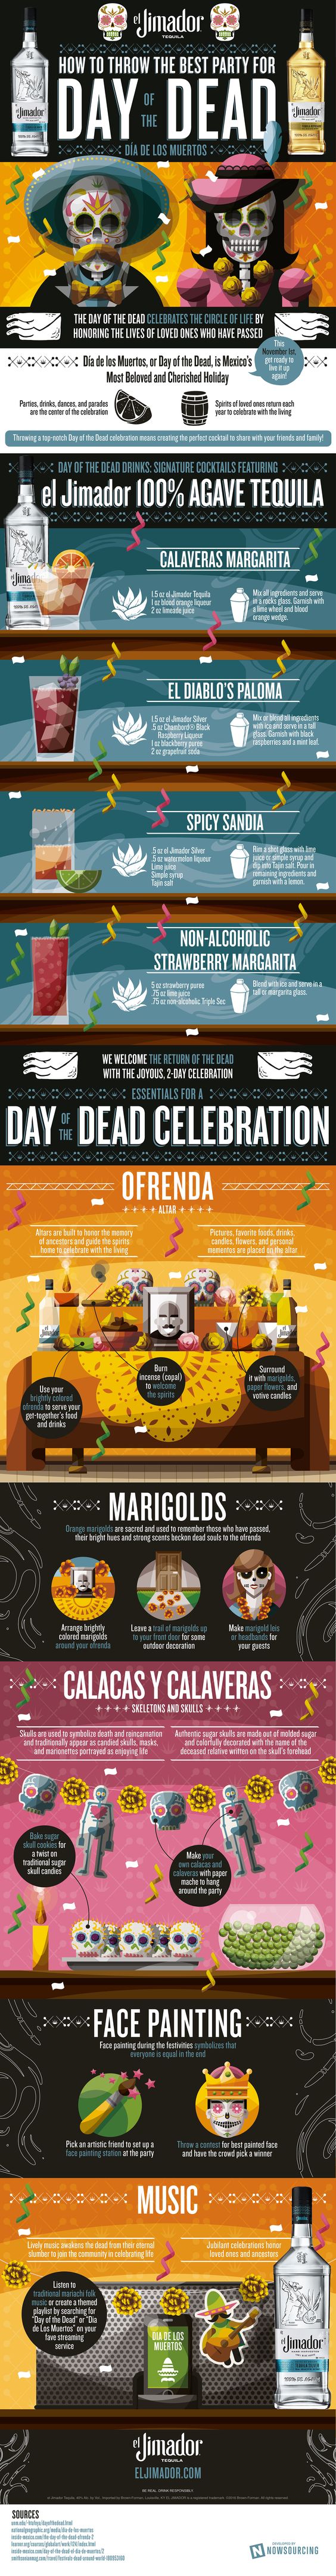 day-of-the-dead